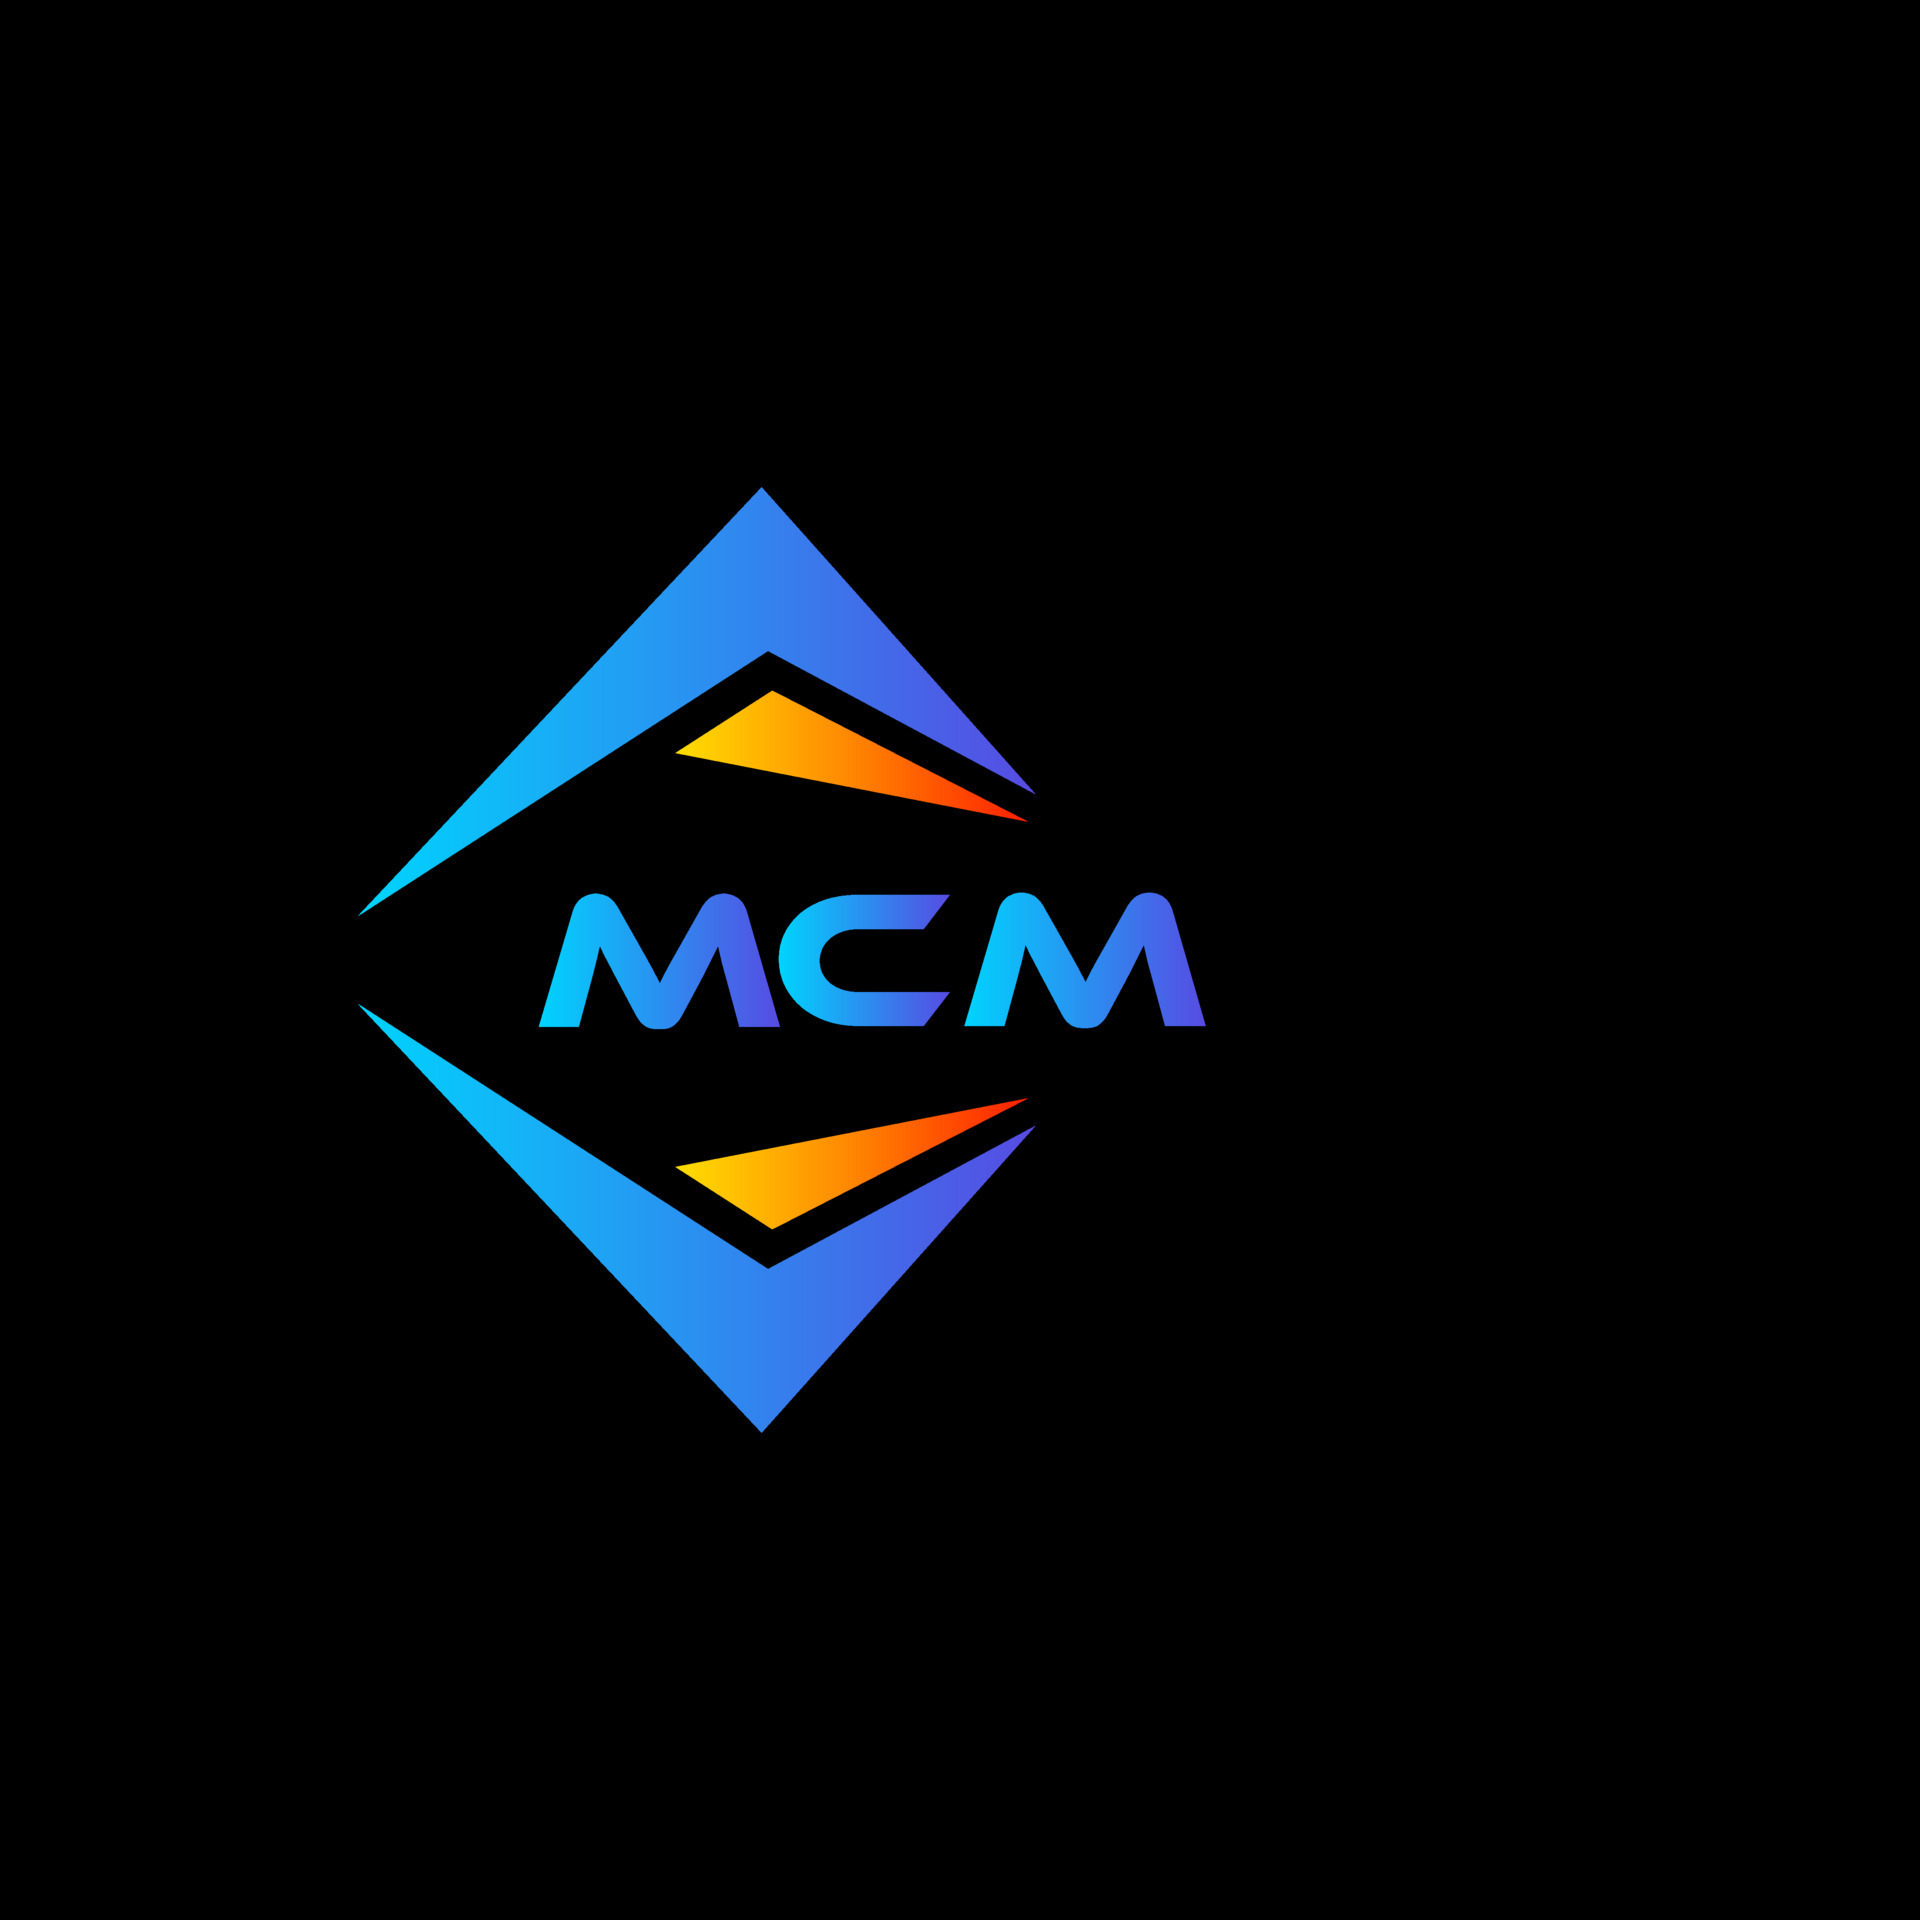 https://static.vecteezy.com/system/resources/previews/014/009/094/original/mcm-abstract-technology-logo-design-on-black-background-mcm-creative-initials-letter-logo-concept-vector.jpg